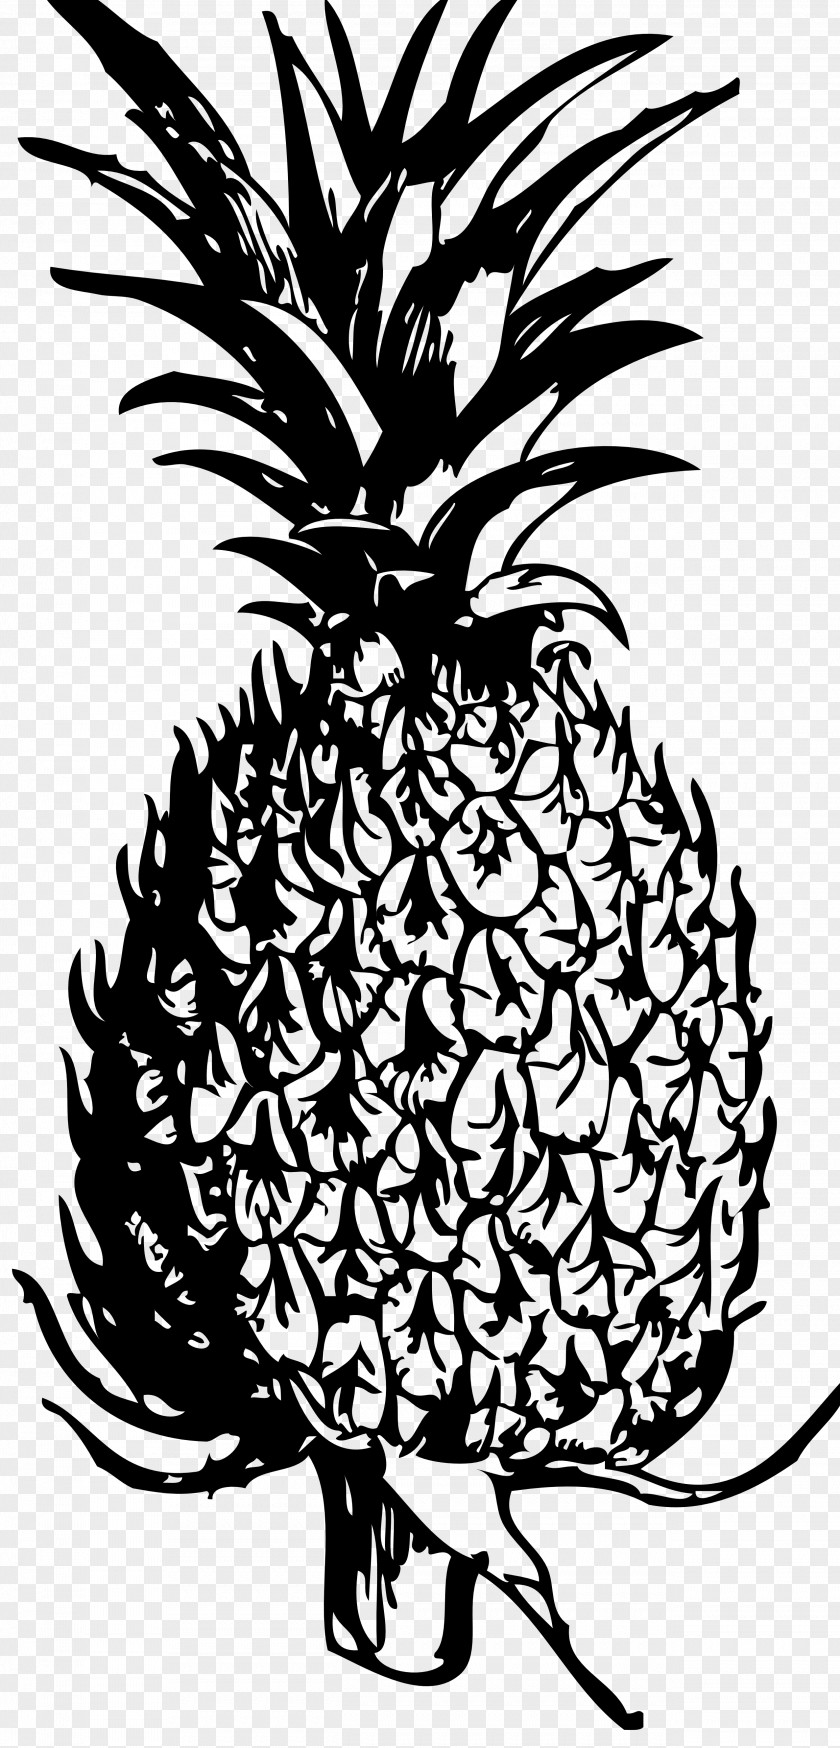 Pineapple Black And White Clip Art PNG